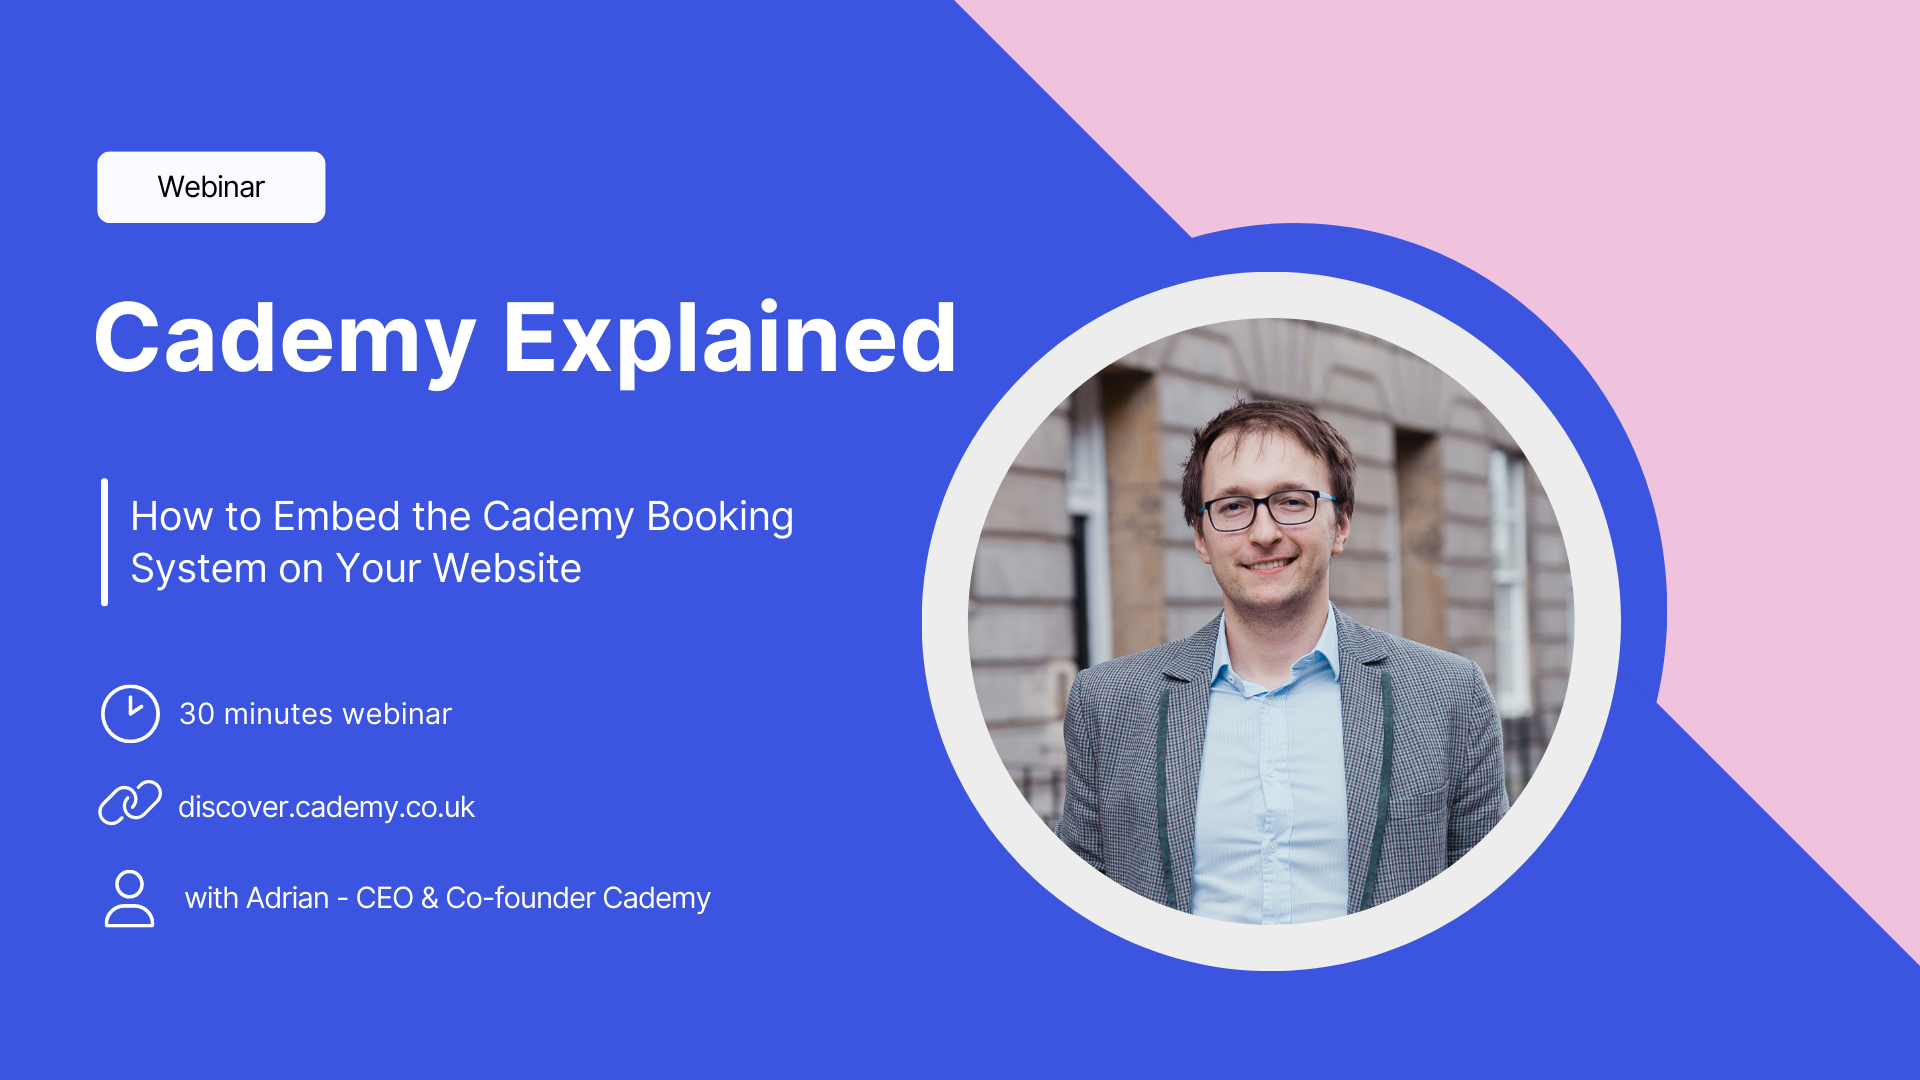 How to Embed the Cademy Booking System on Your Website